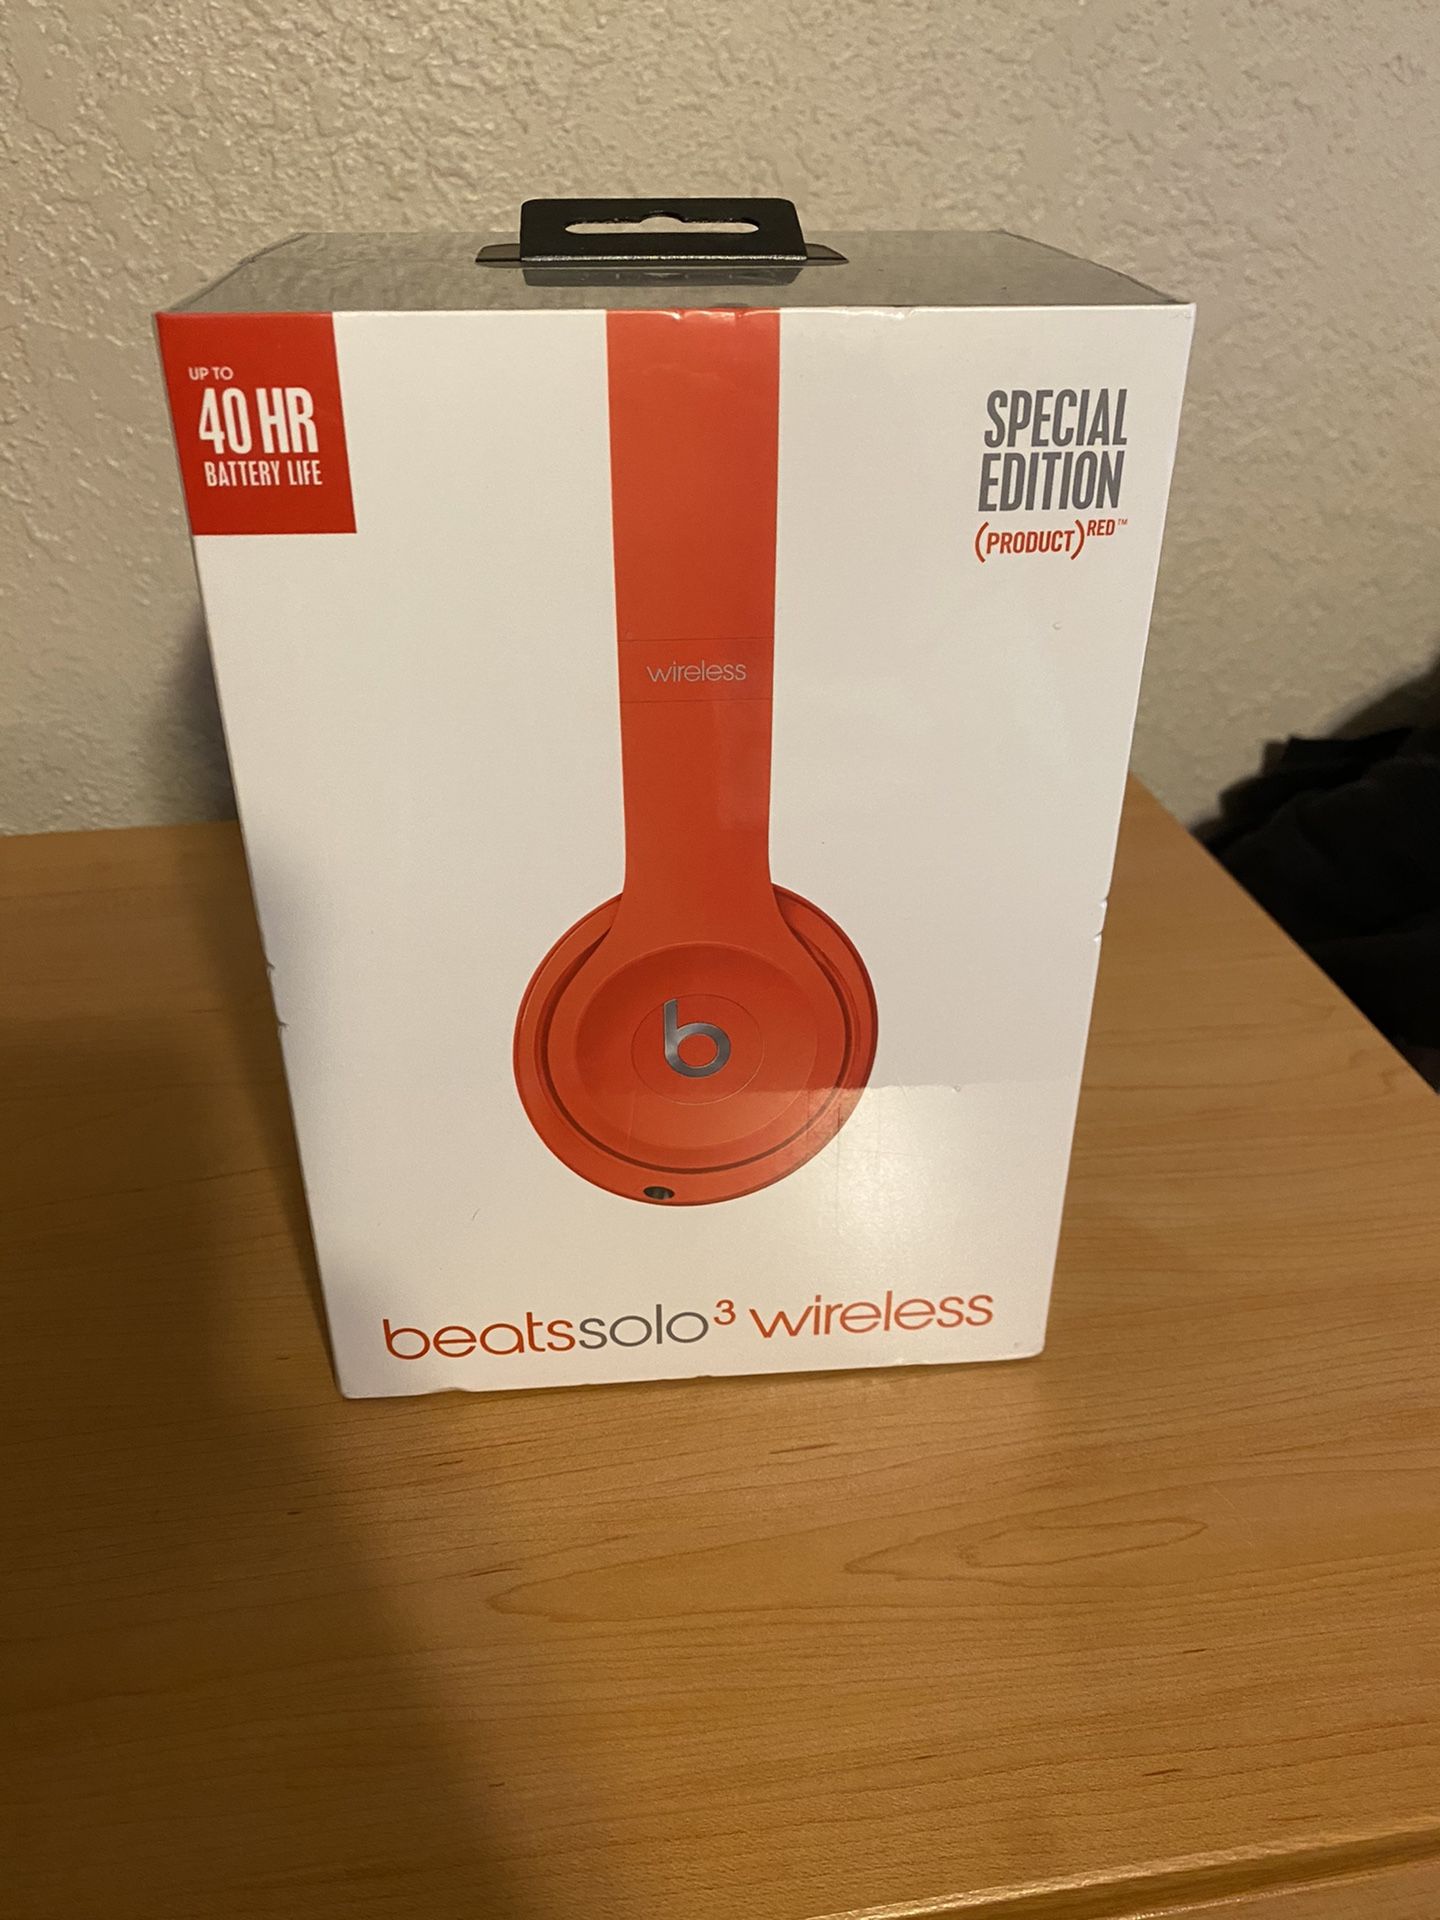 Beats solo 3 wireless special edition product red